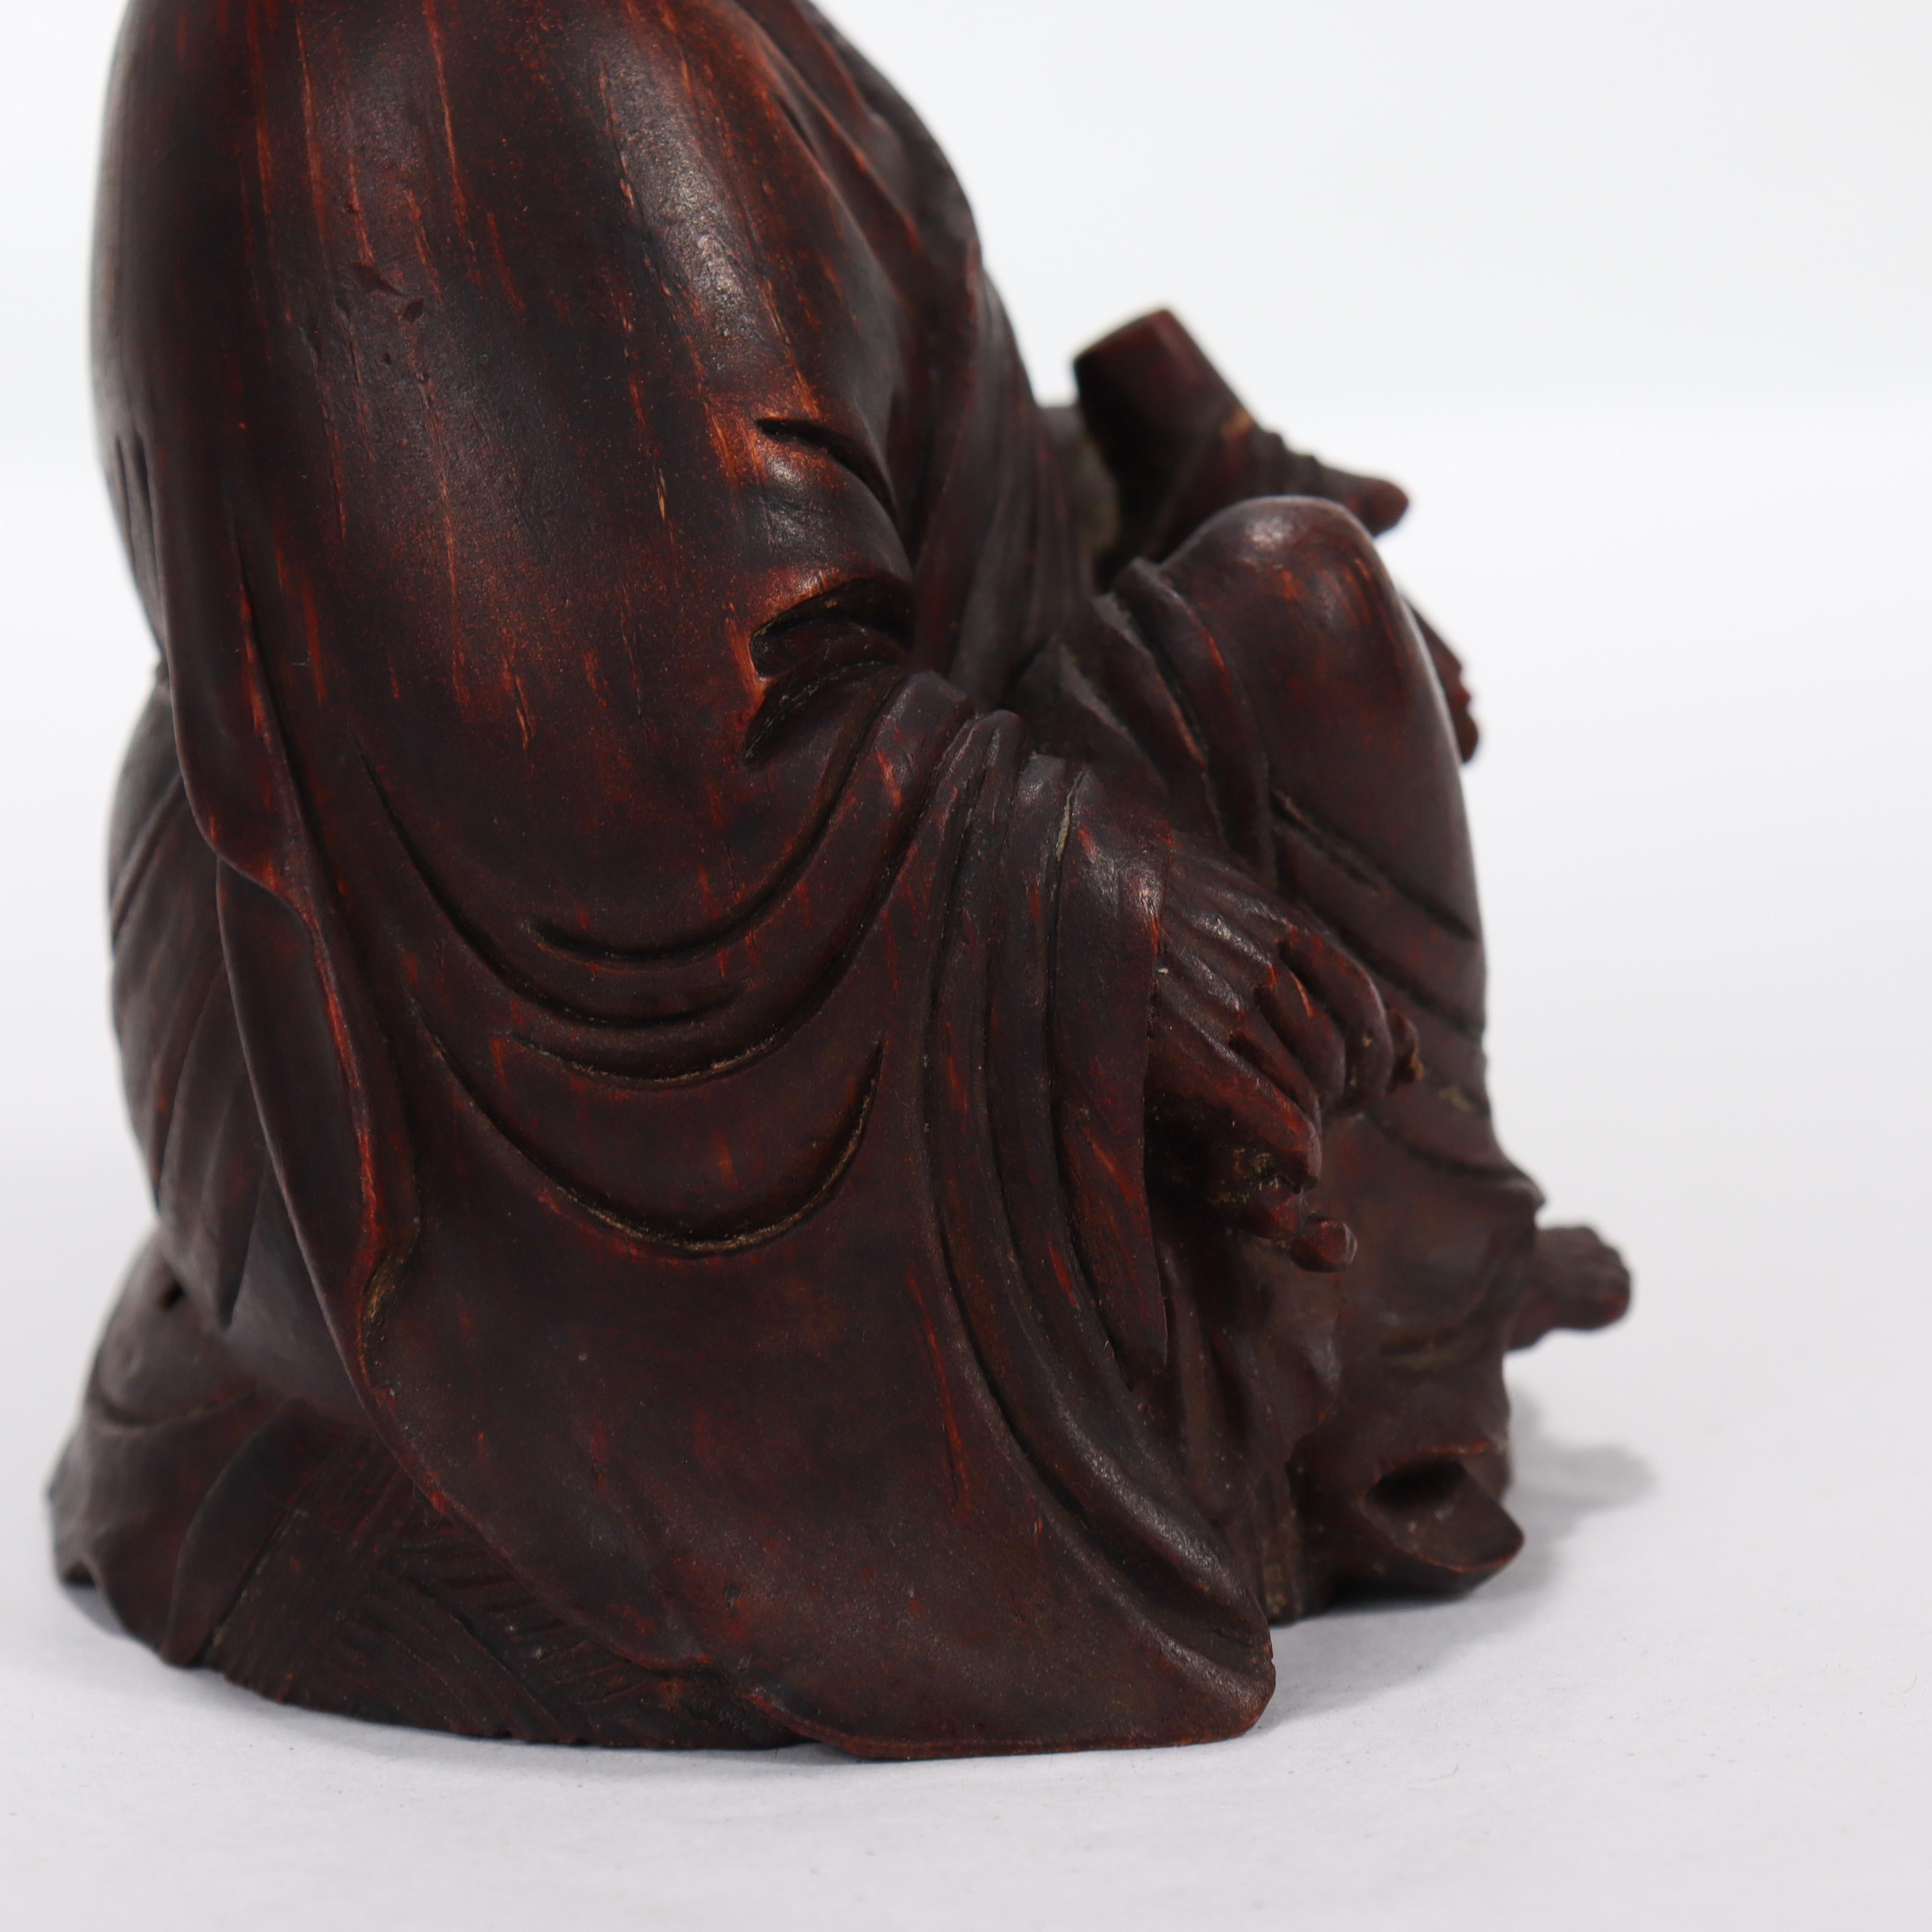 Old or Antique Japanese Wooden Figurine of a Buddhist Monk For Sale 4